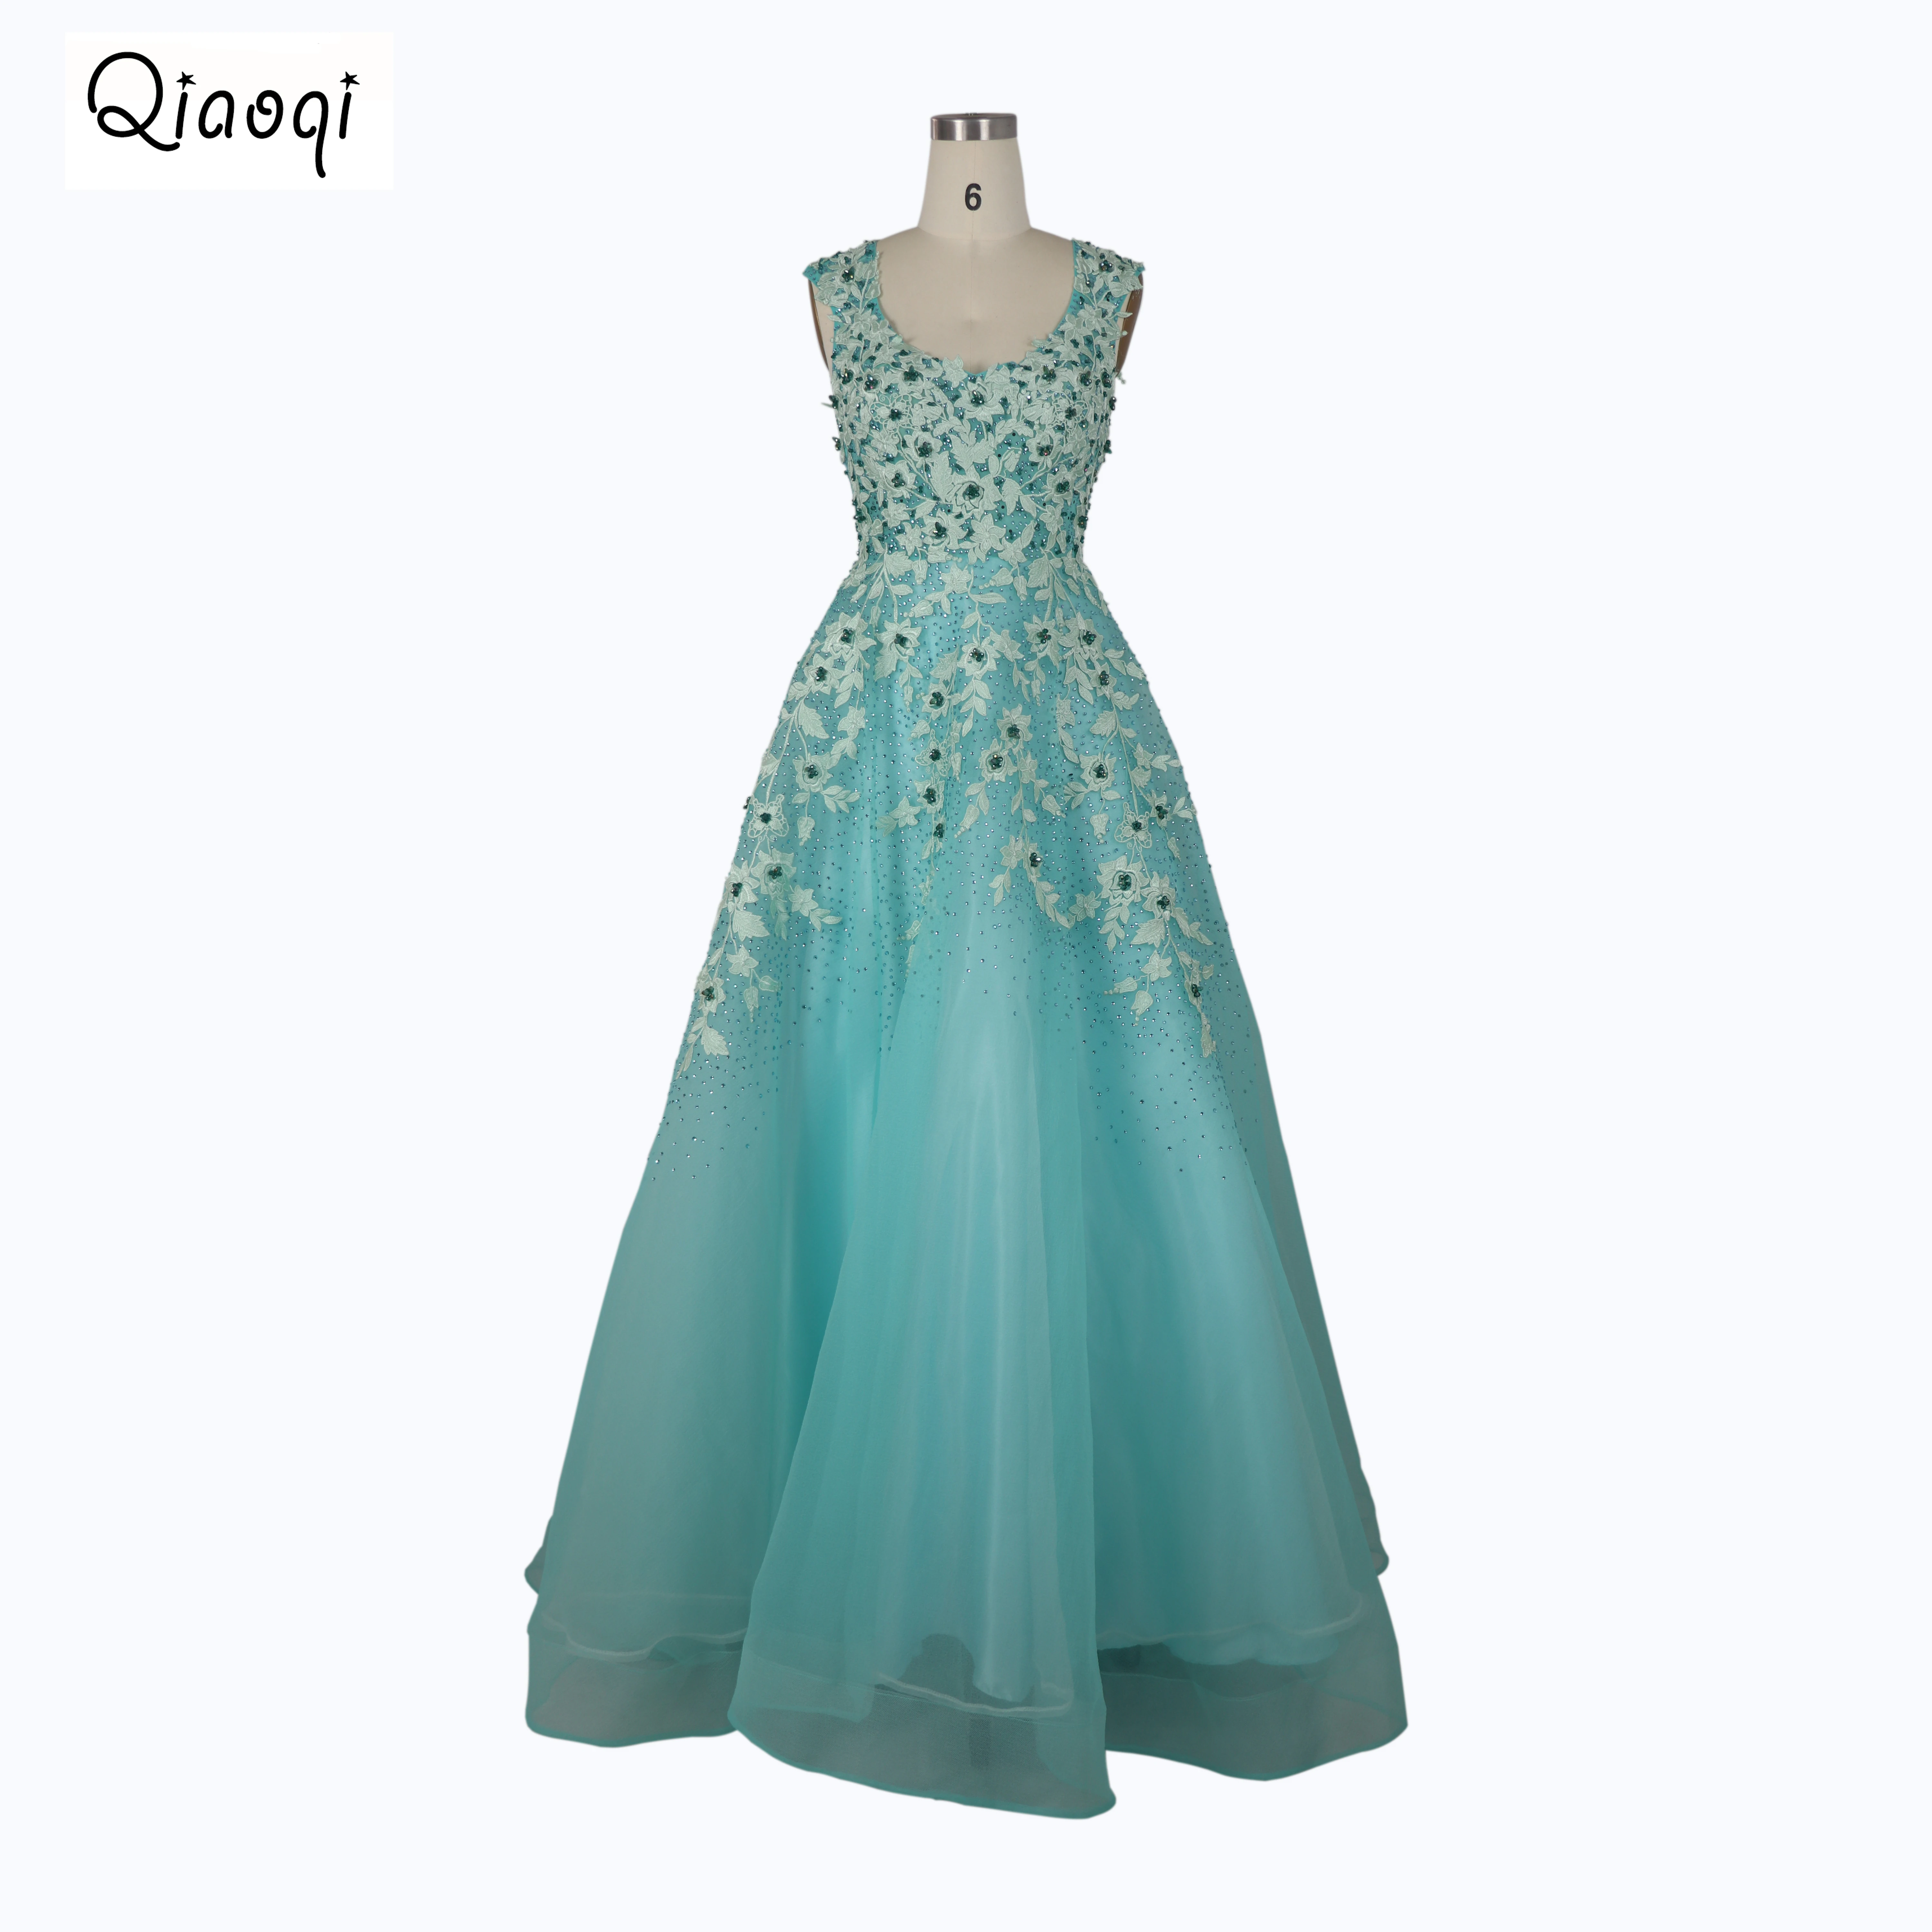 Luxury heavy beaded evening dresses embroidered prom dress women